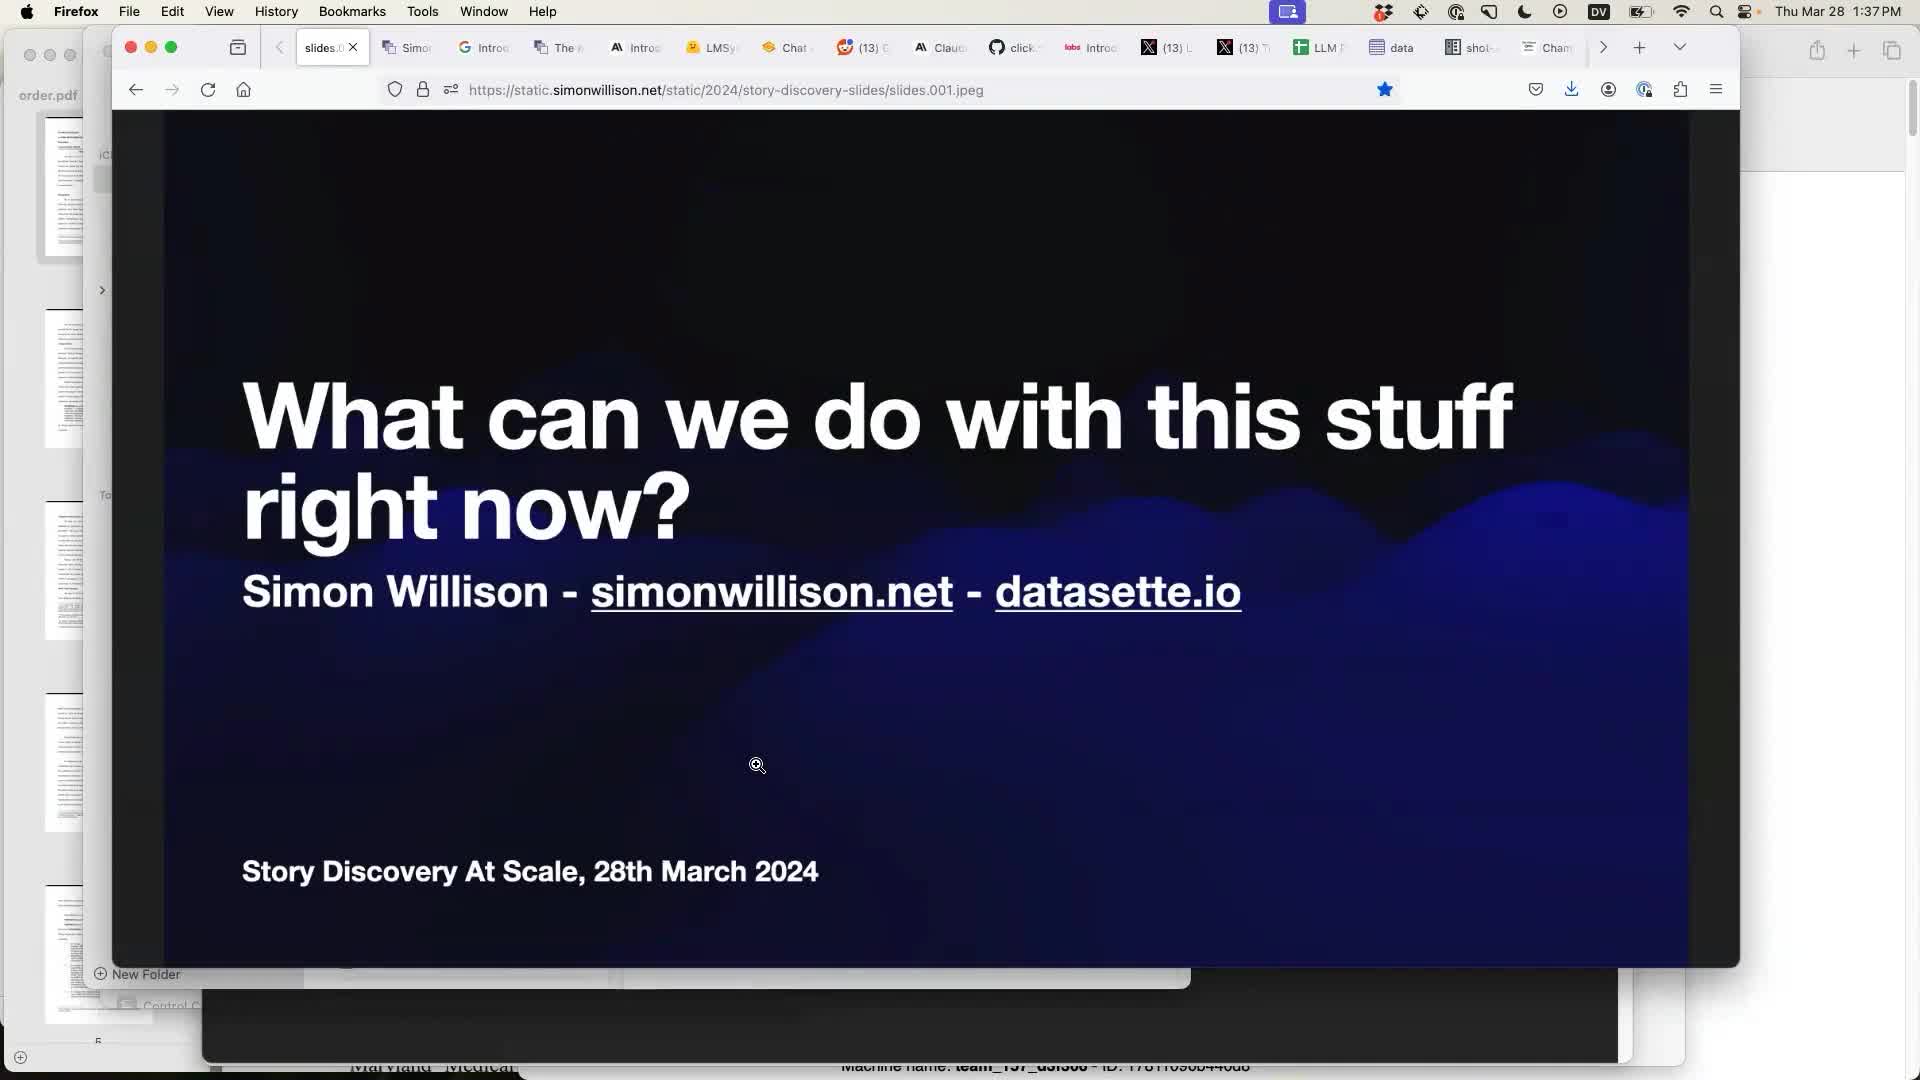 What can we do with this stuff right now? Simon Willison - simonwillison.net - datasette.io - Story Discovery At Scale, 28th March 2024